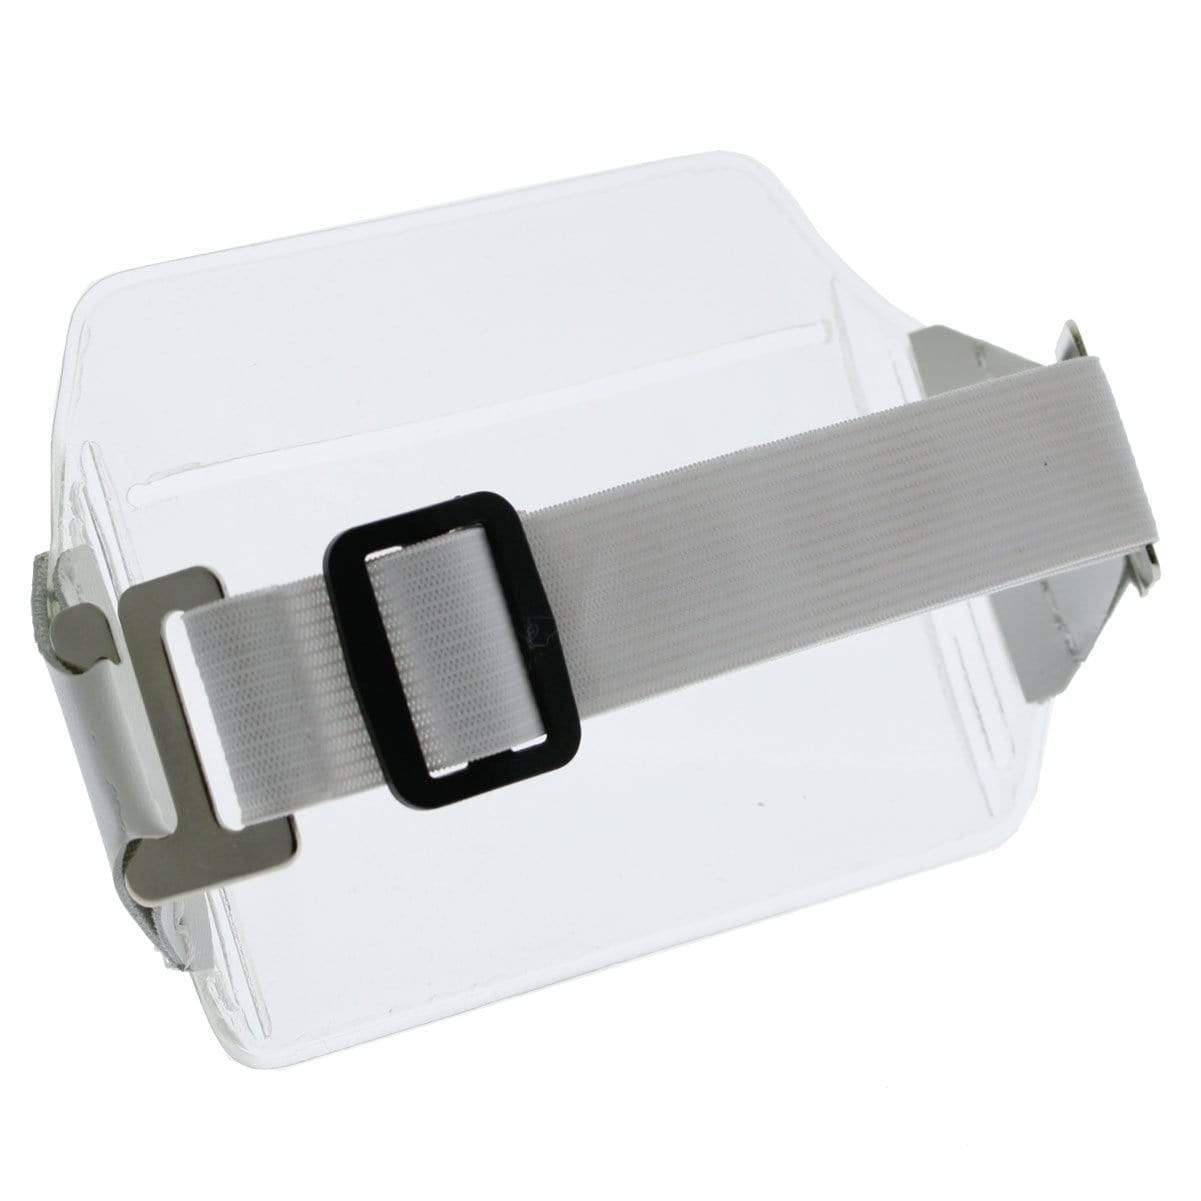 A Clear Over Size Vinyl Horizontal Arm Band Badge Holder (P/N 1840-7100) with a white adjustable strap and a black buckle is attached to a transparent rectangular plastic sheet, serving as an armband badge holder. The strap features a metal clip on one end.